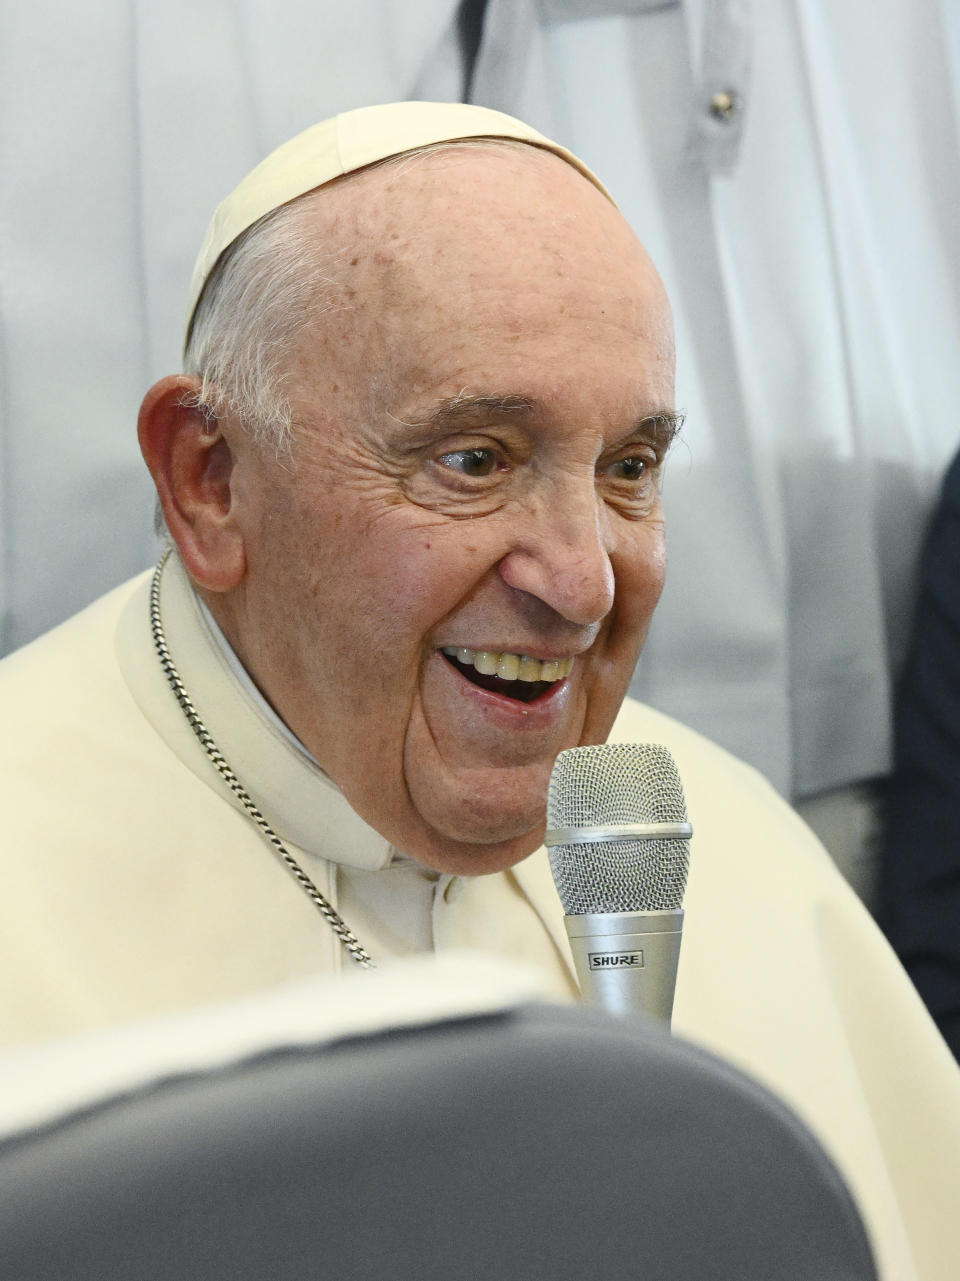 Pope Francis meets the journalists during a press conference aboard the airplane directed to Rome, at the end of his pastoral visit to Hungary, Sunday, April 30, 2023. (Vincenzo Pinto/Pool Photo Via AP)